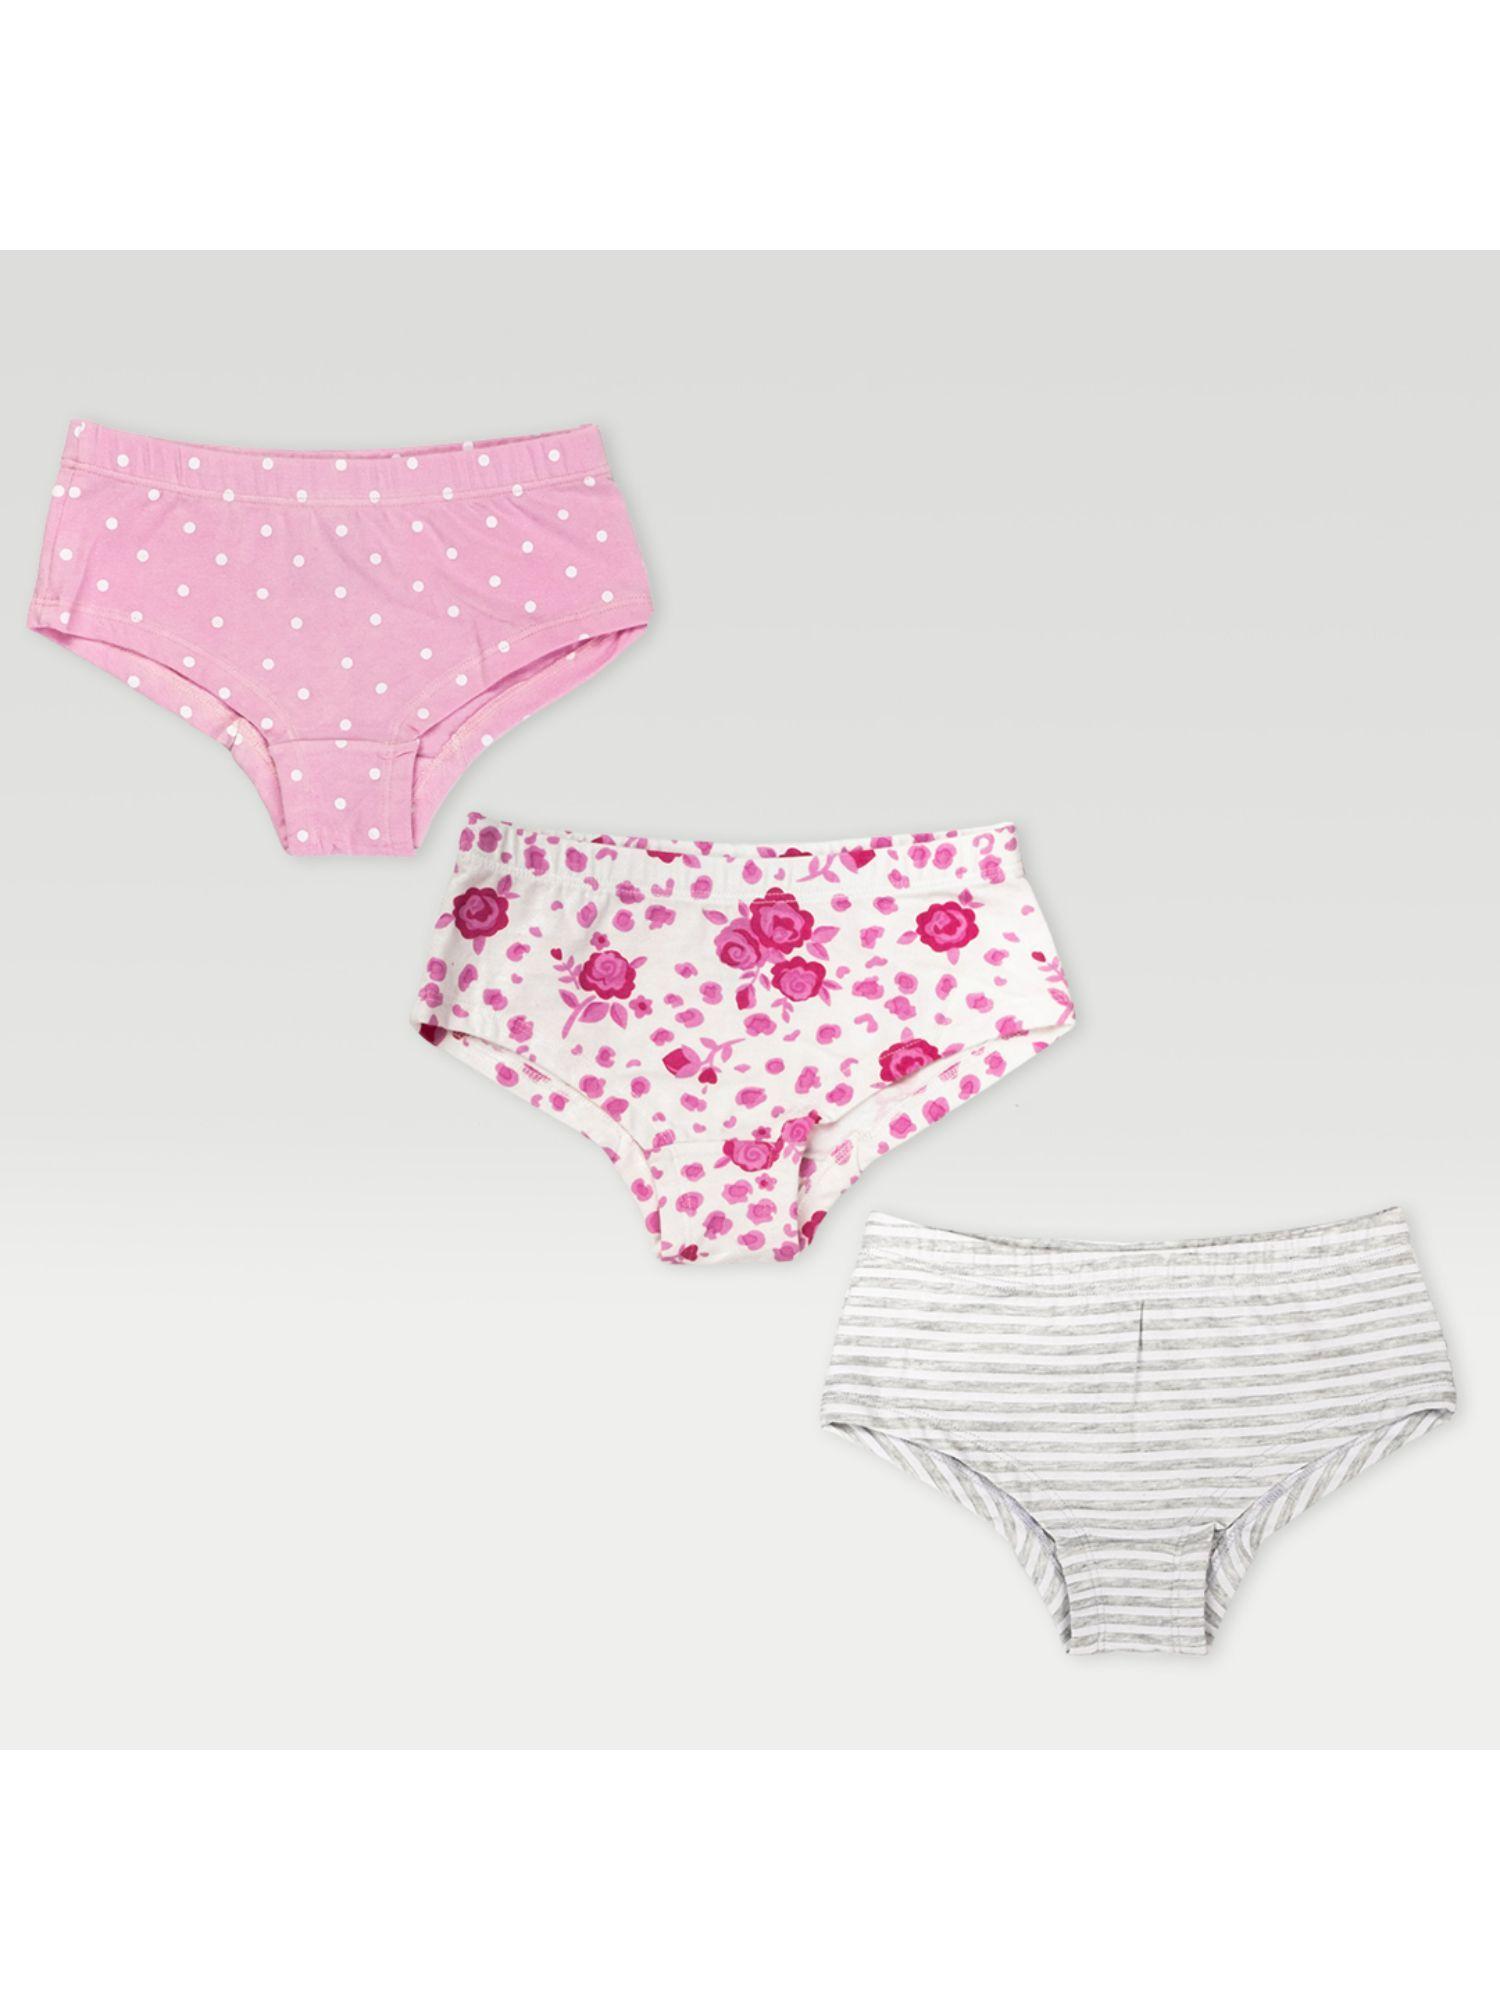 girl's-boy-pant-pink,-white,-grey-pink-(pack-of-3)